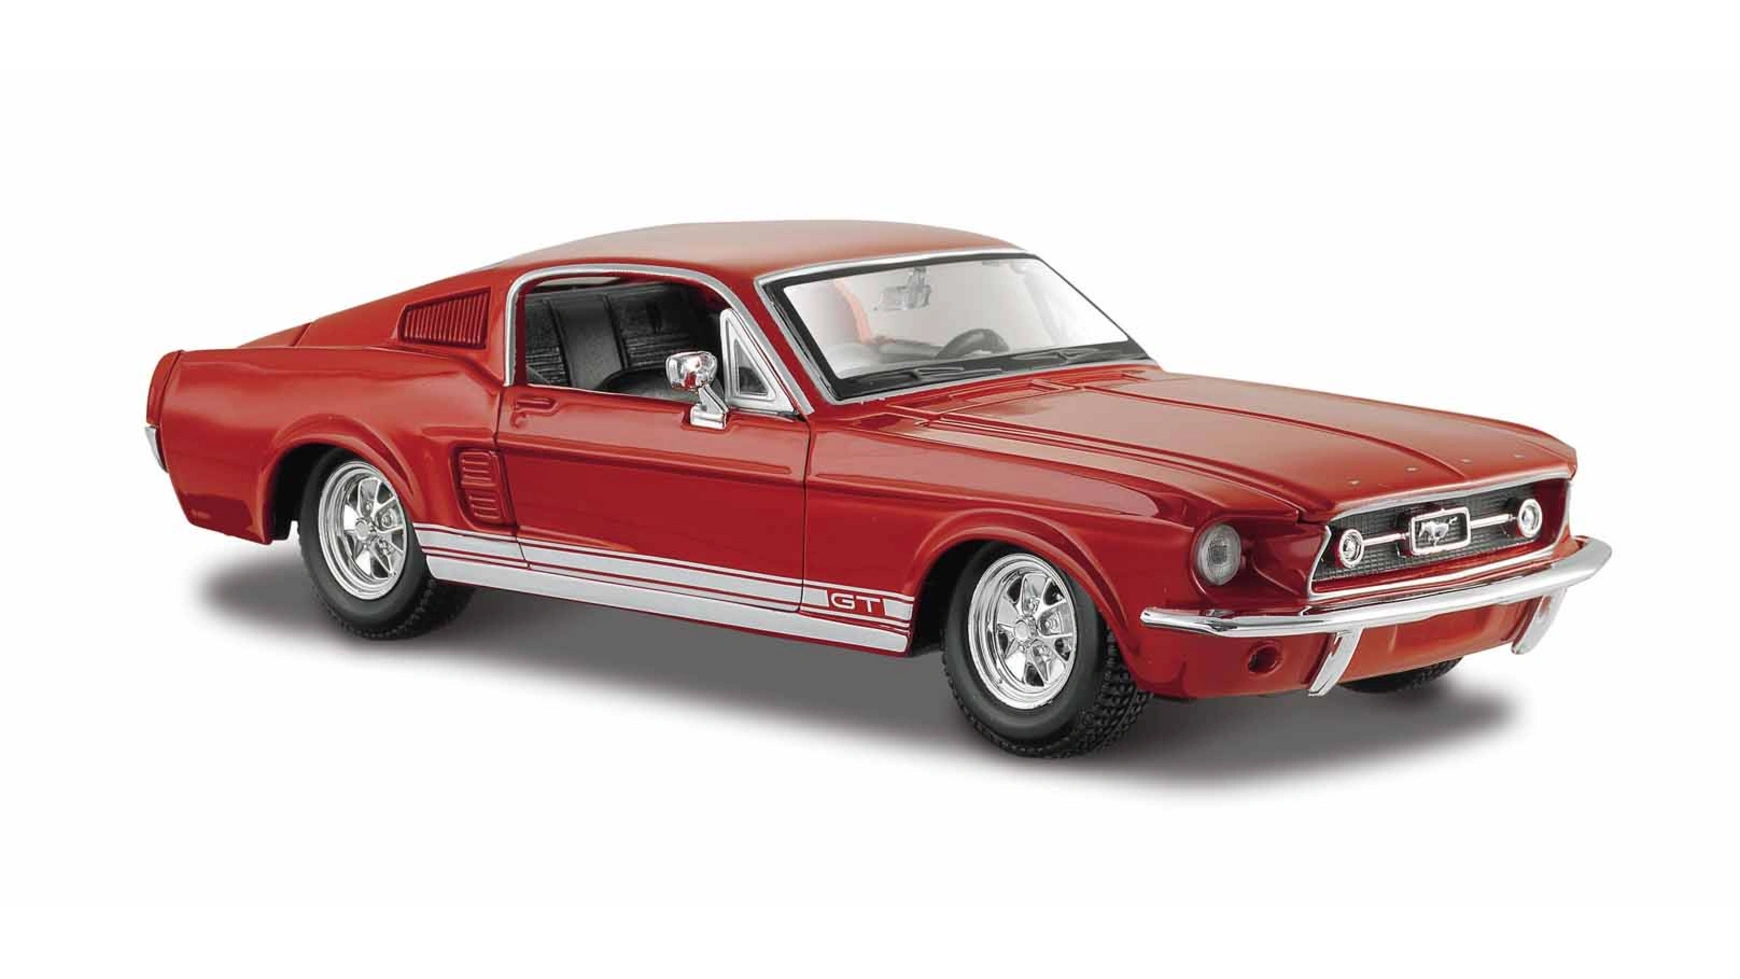 Maisto 1:24 Ford Mustang GT 67 maisto 1 18 ford mustang mach 1 1970